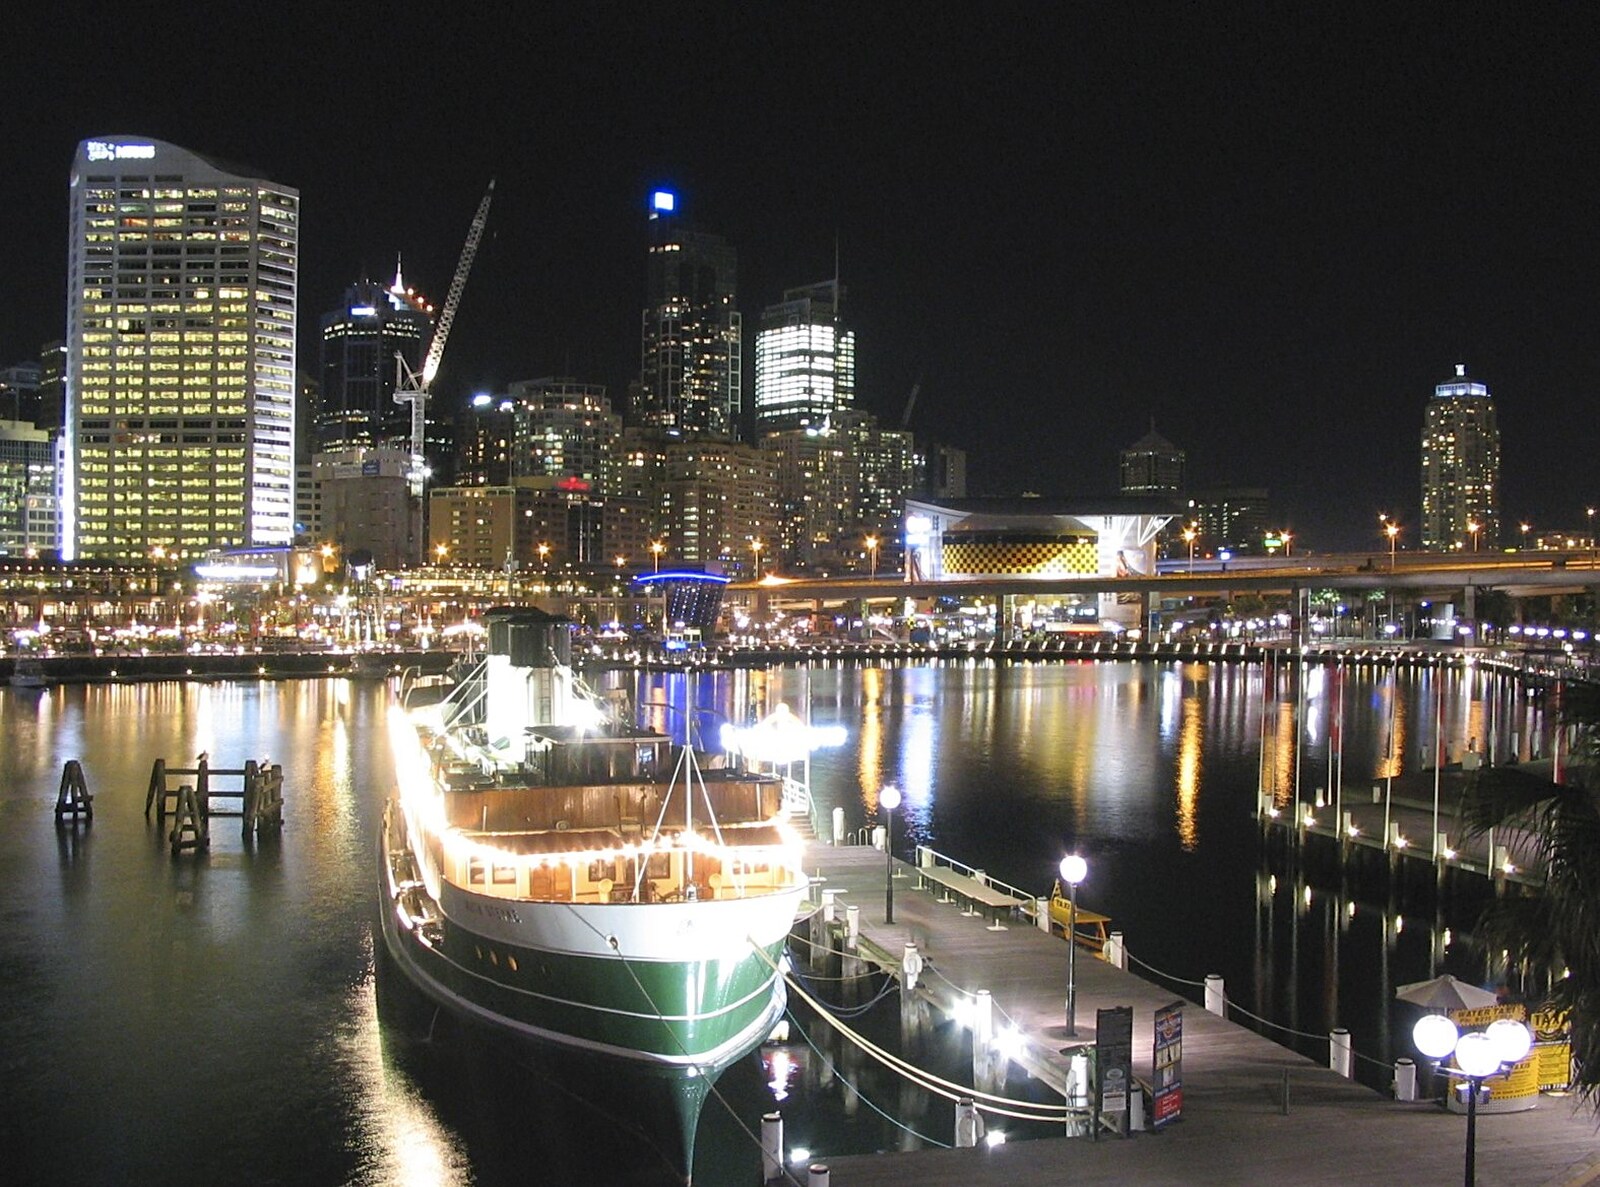 Darling Harbour by night from Sydney, New South Wales, Australia - 10th October 2004